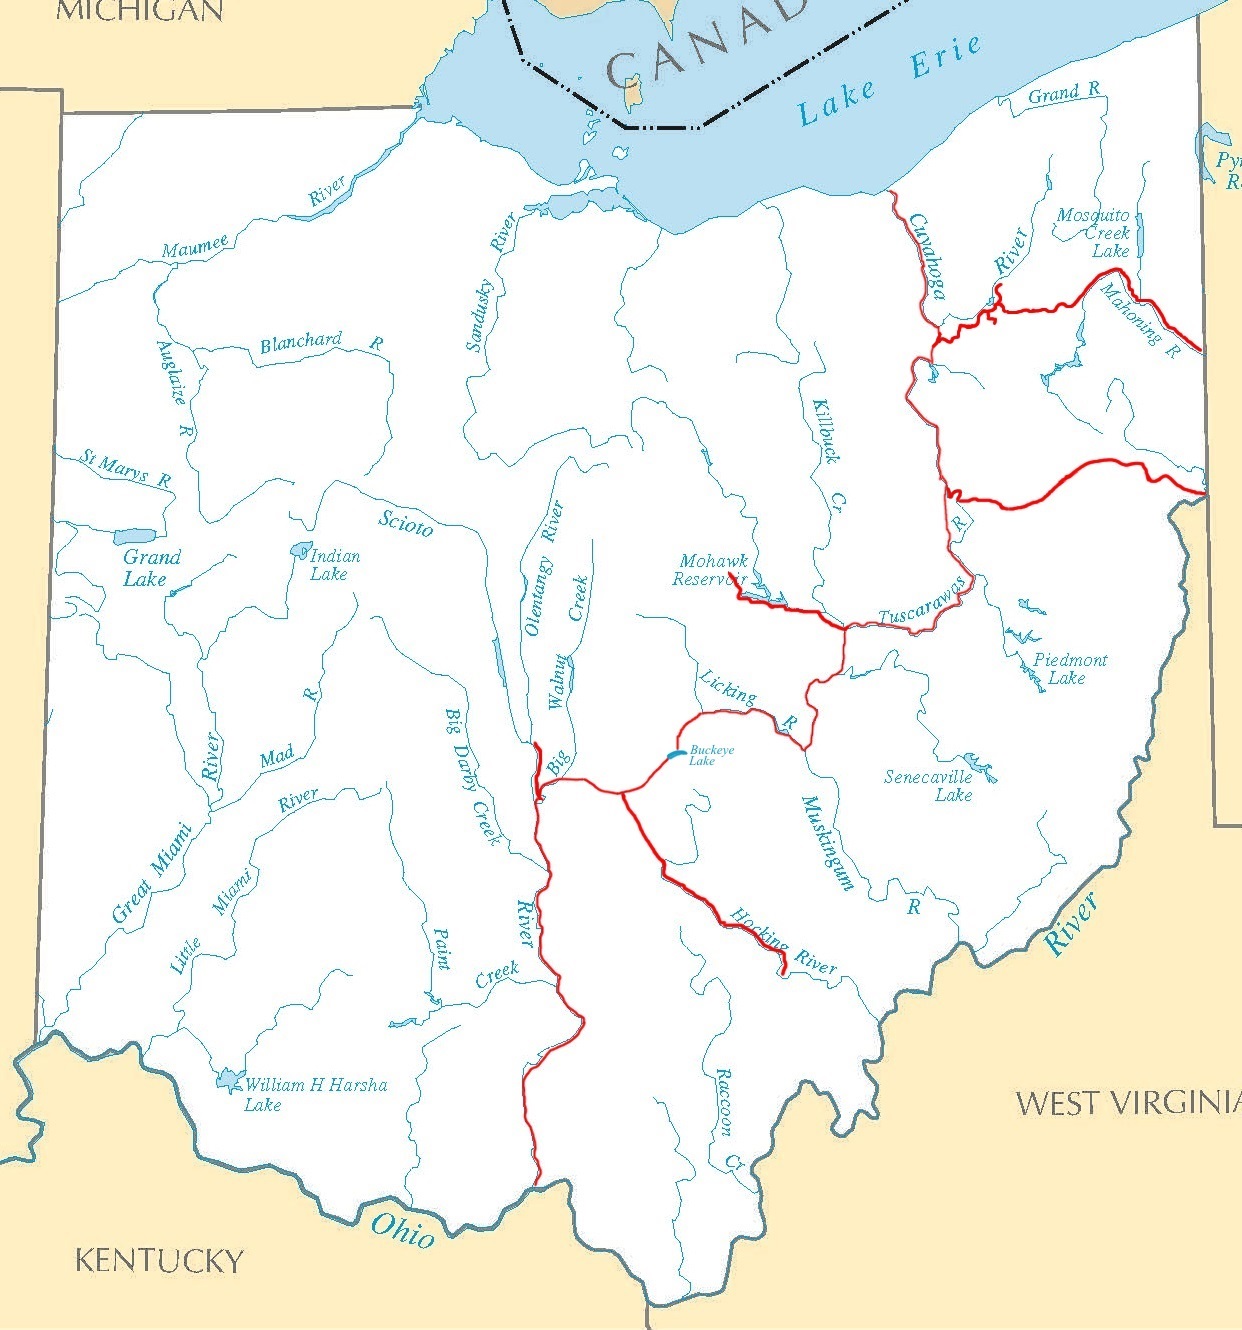 Ohio and Erie Canal system map